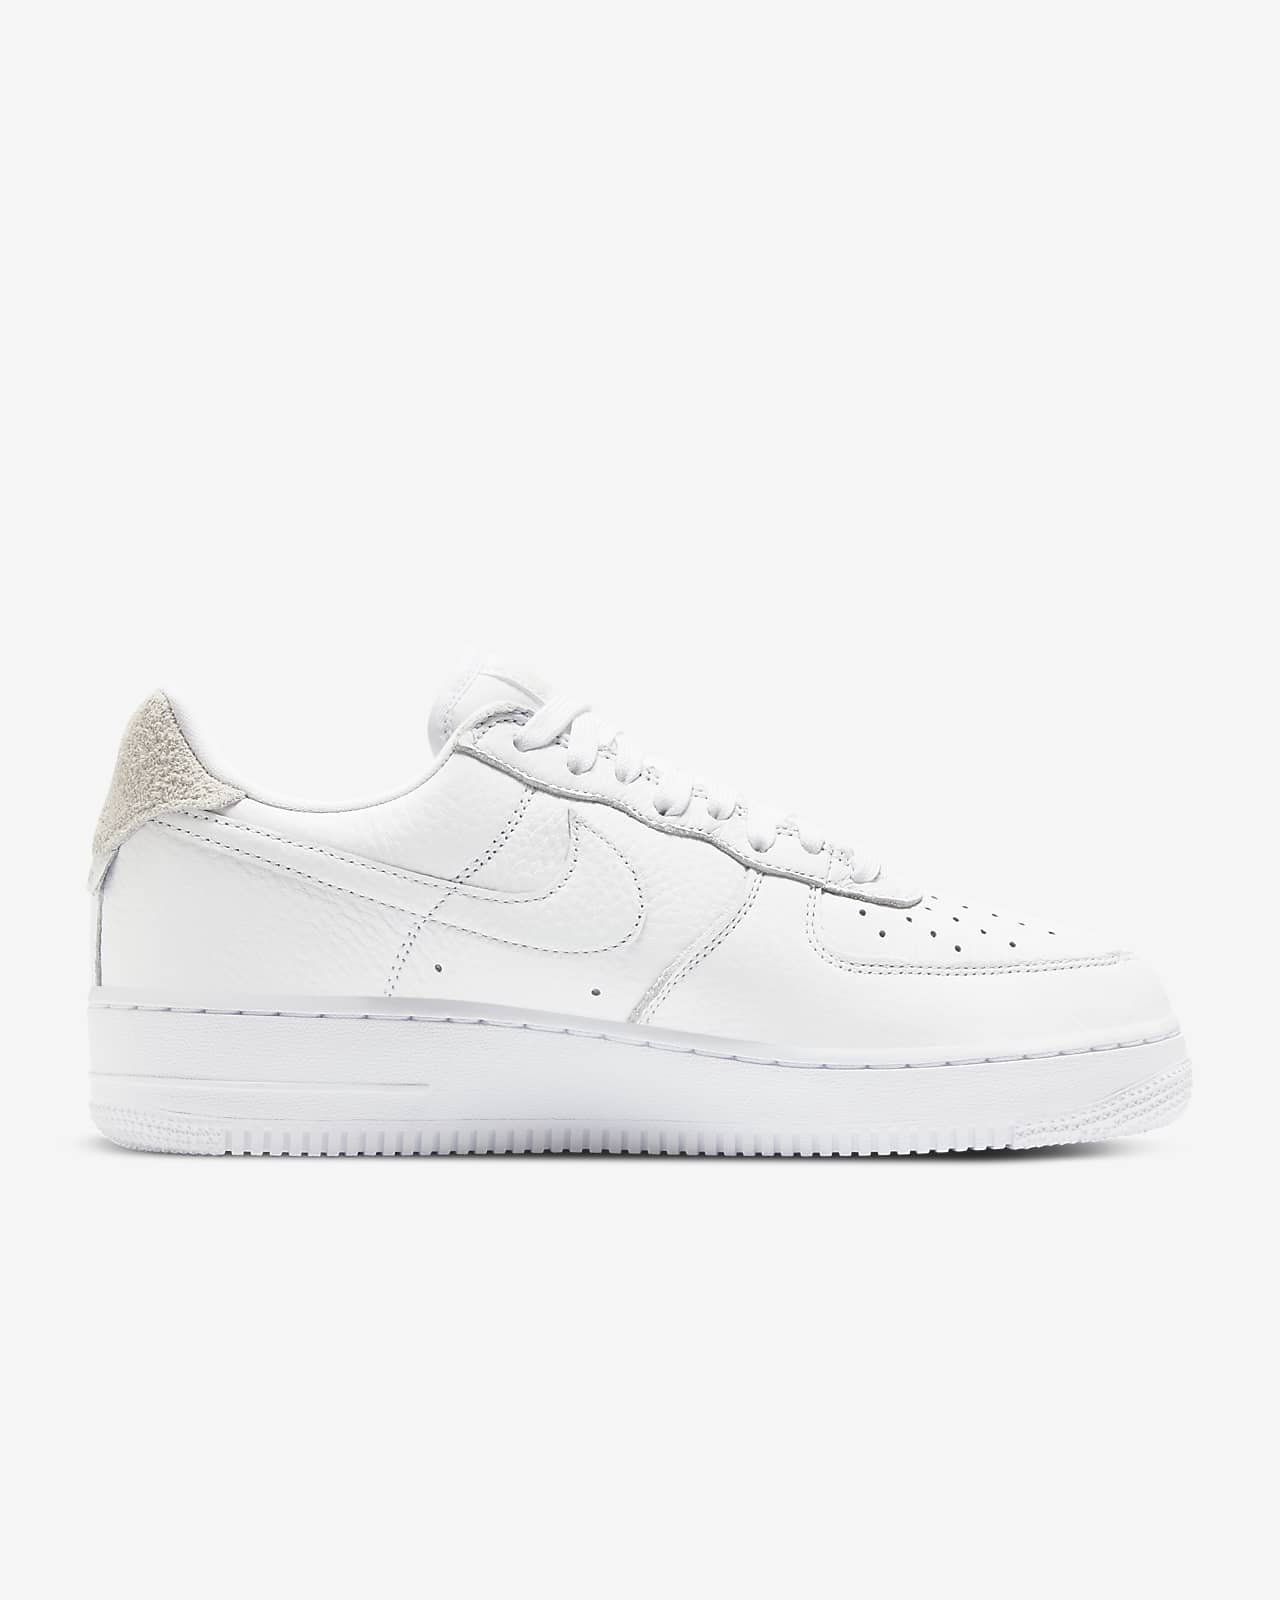 mens all white air force ones